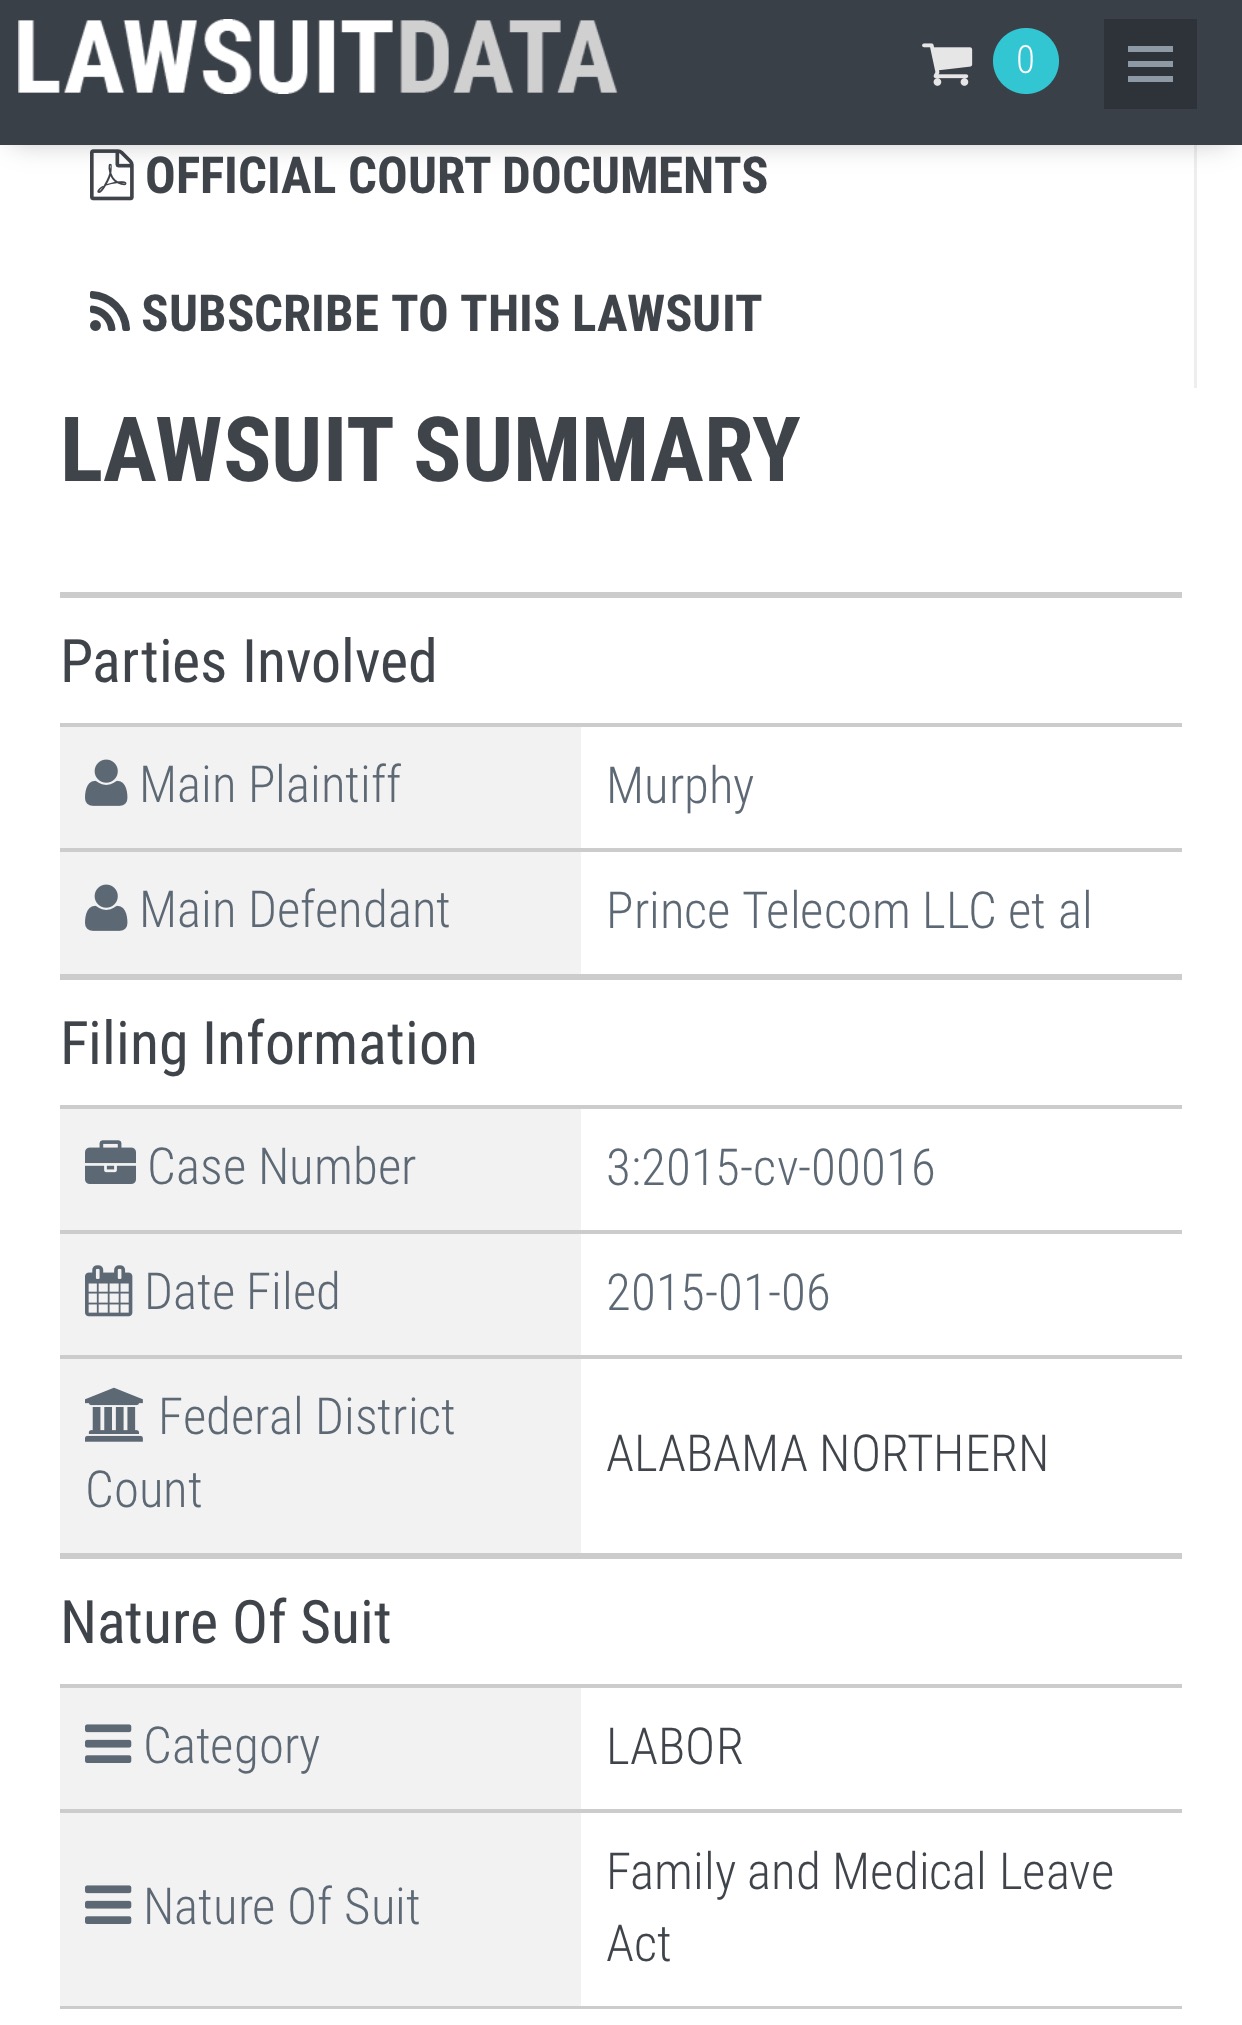 Murphy v Prince Telecom Labor / Fmla law suit https://www.lawsuitdata.com/lawsuit-data/natures-of-suit/labor-lawsuits/family-and-medical-leave-act/alabama-northern-district-court/0000802710/murphy-v